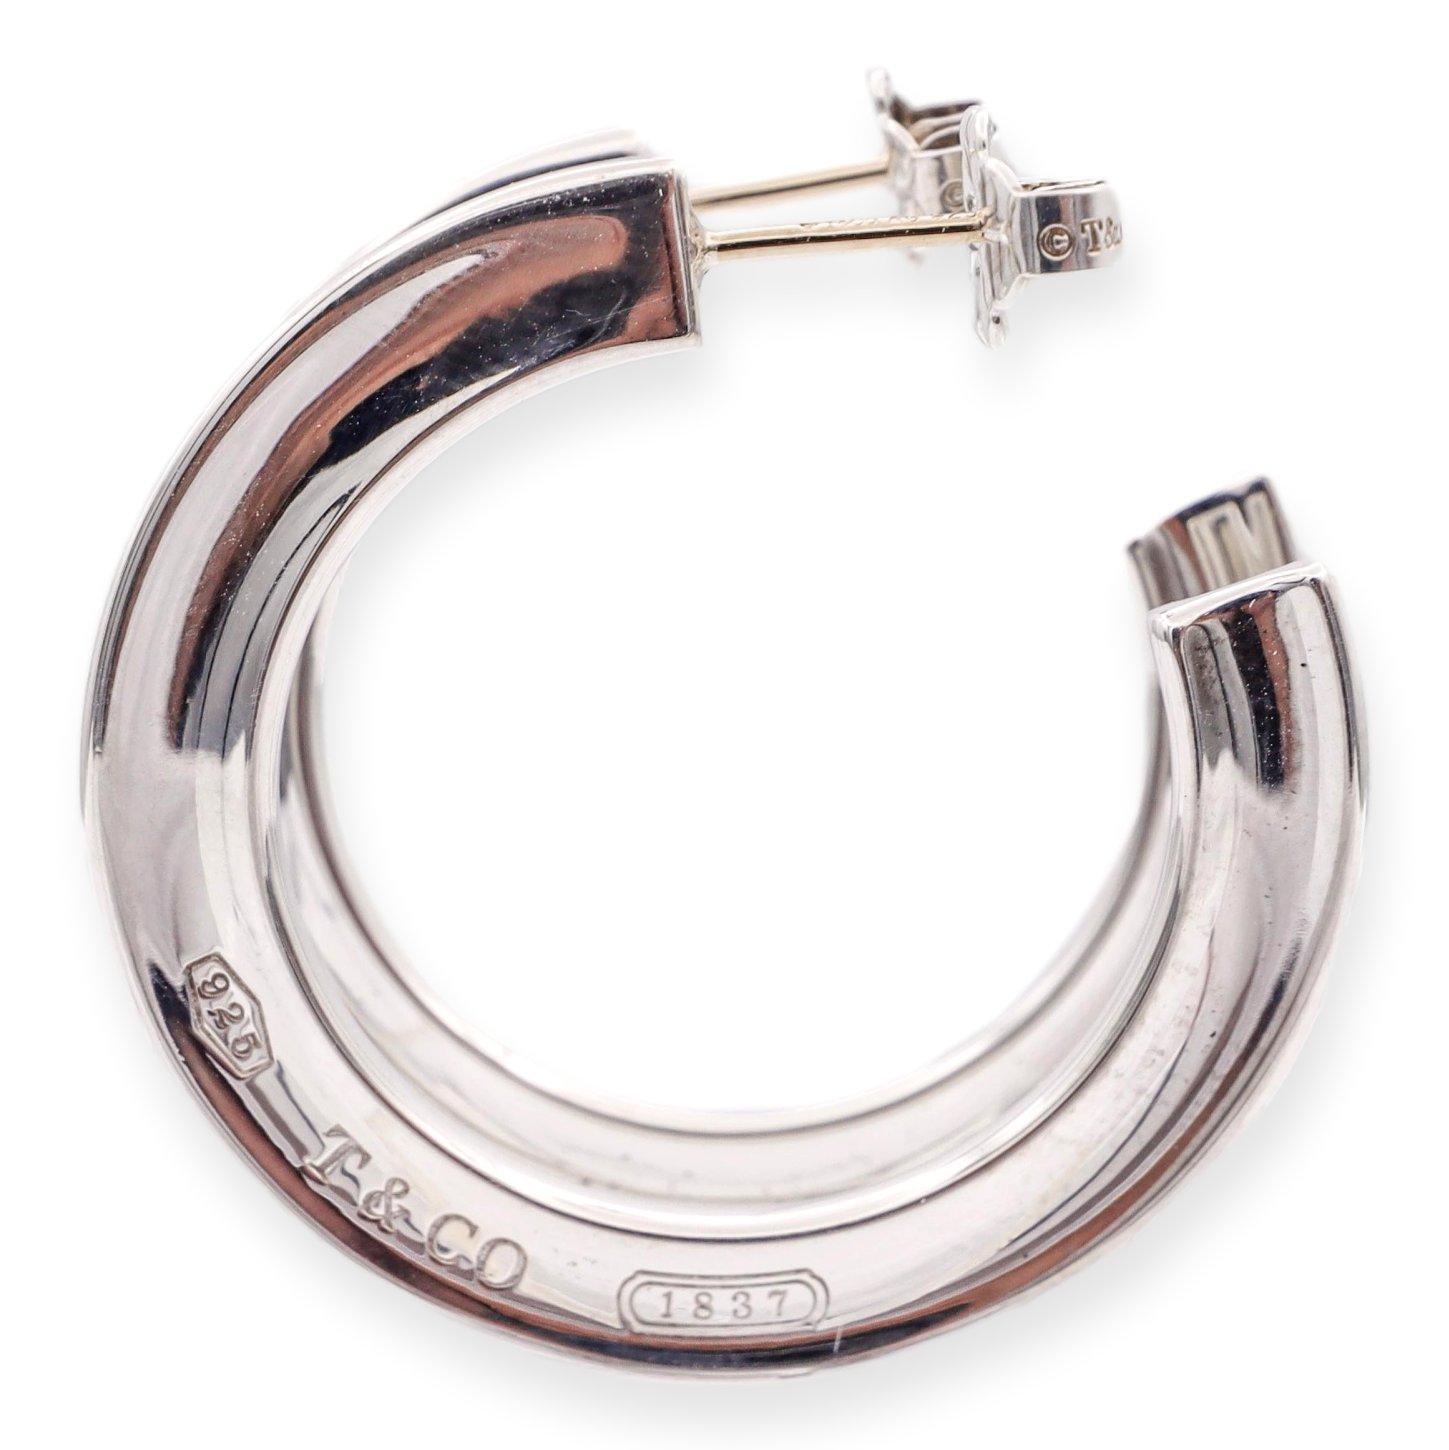 Tiffany & Co. pair of hoop earrings from the 1837 collection finely crafted in sterling silver featuring flat edges and posts with butterfly backs. The earrings measure 1.25 inches in diameter and hang 1.25 inches from earlobe. Fully hallmarked with